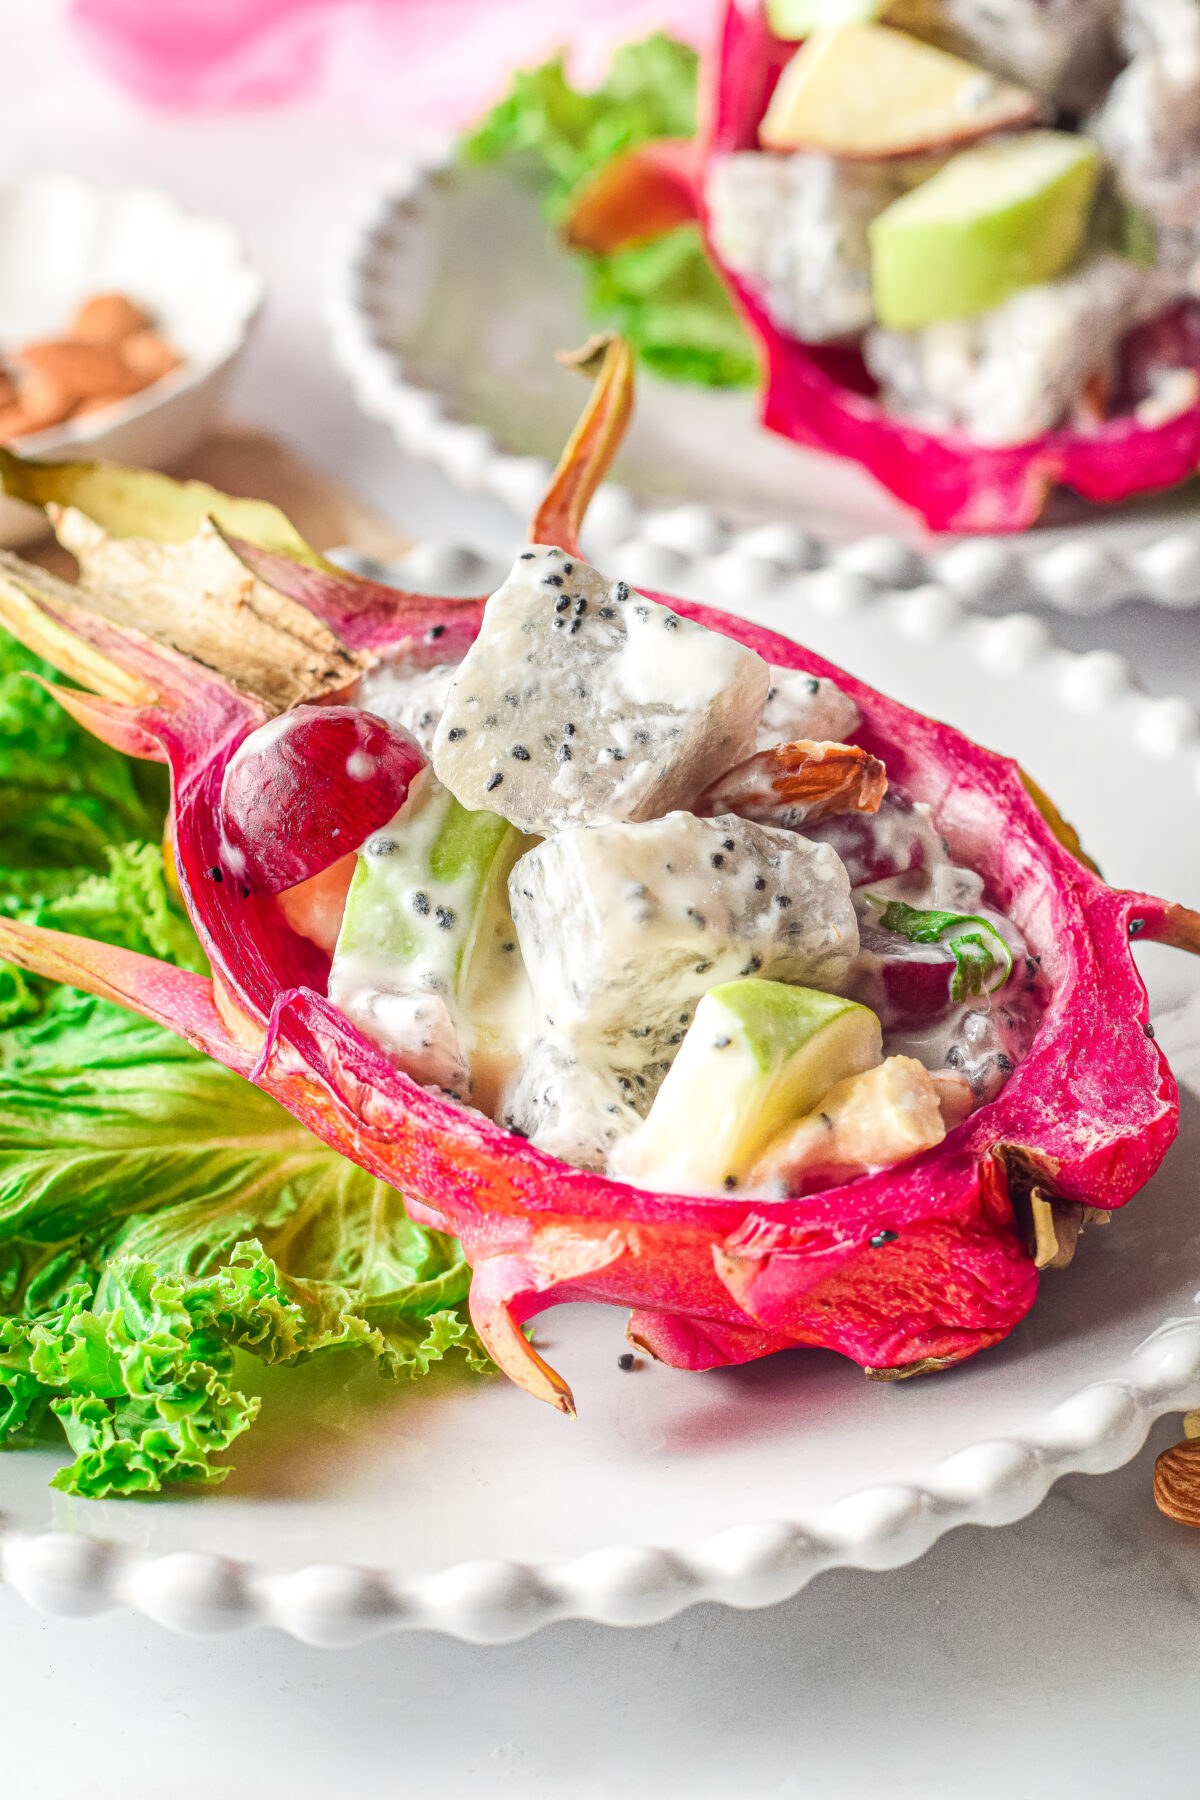 A delicious and healthy dragon fruit Waldorf salad recipe that is perfect for a light summer meal. It's a fabulous and unique summer salad.